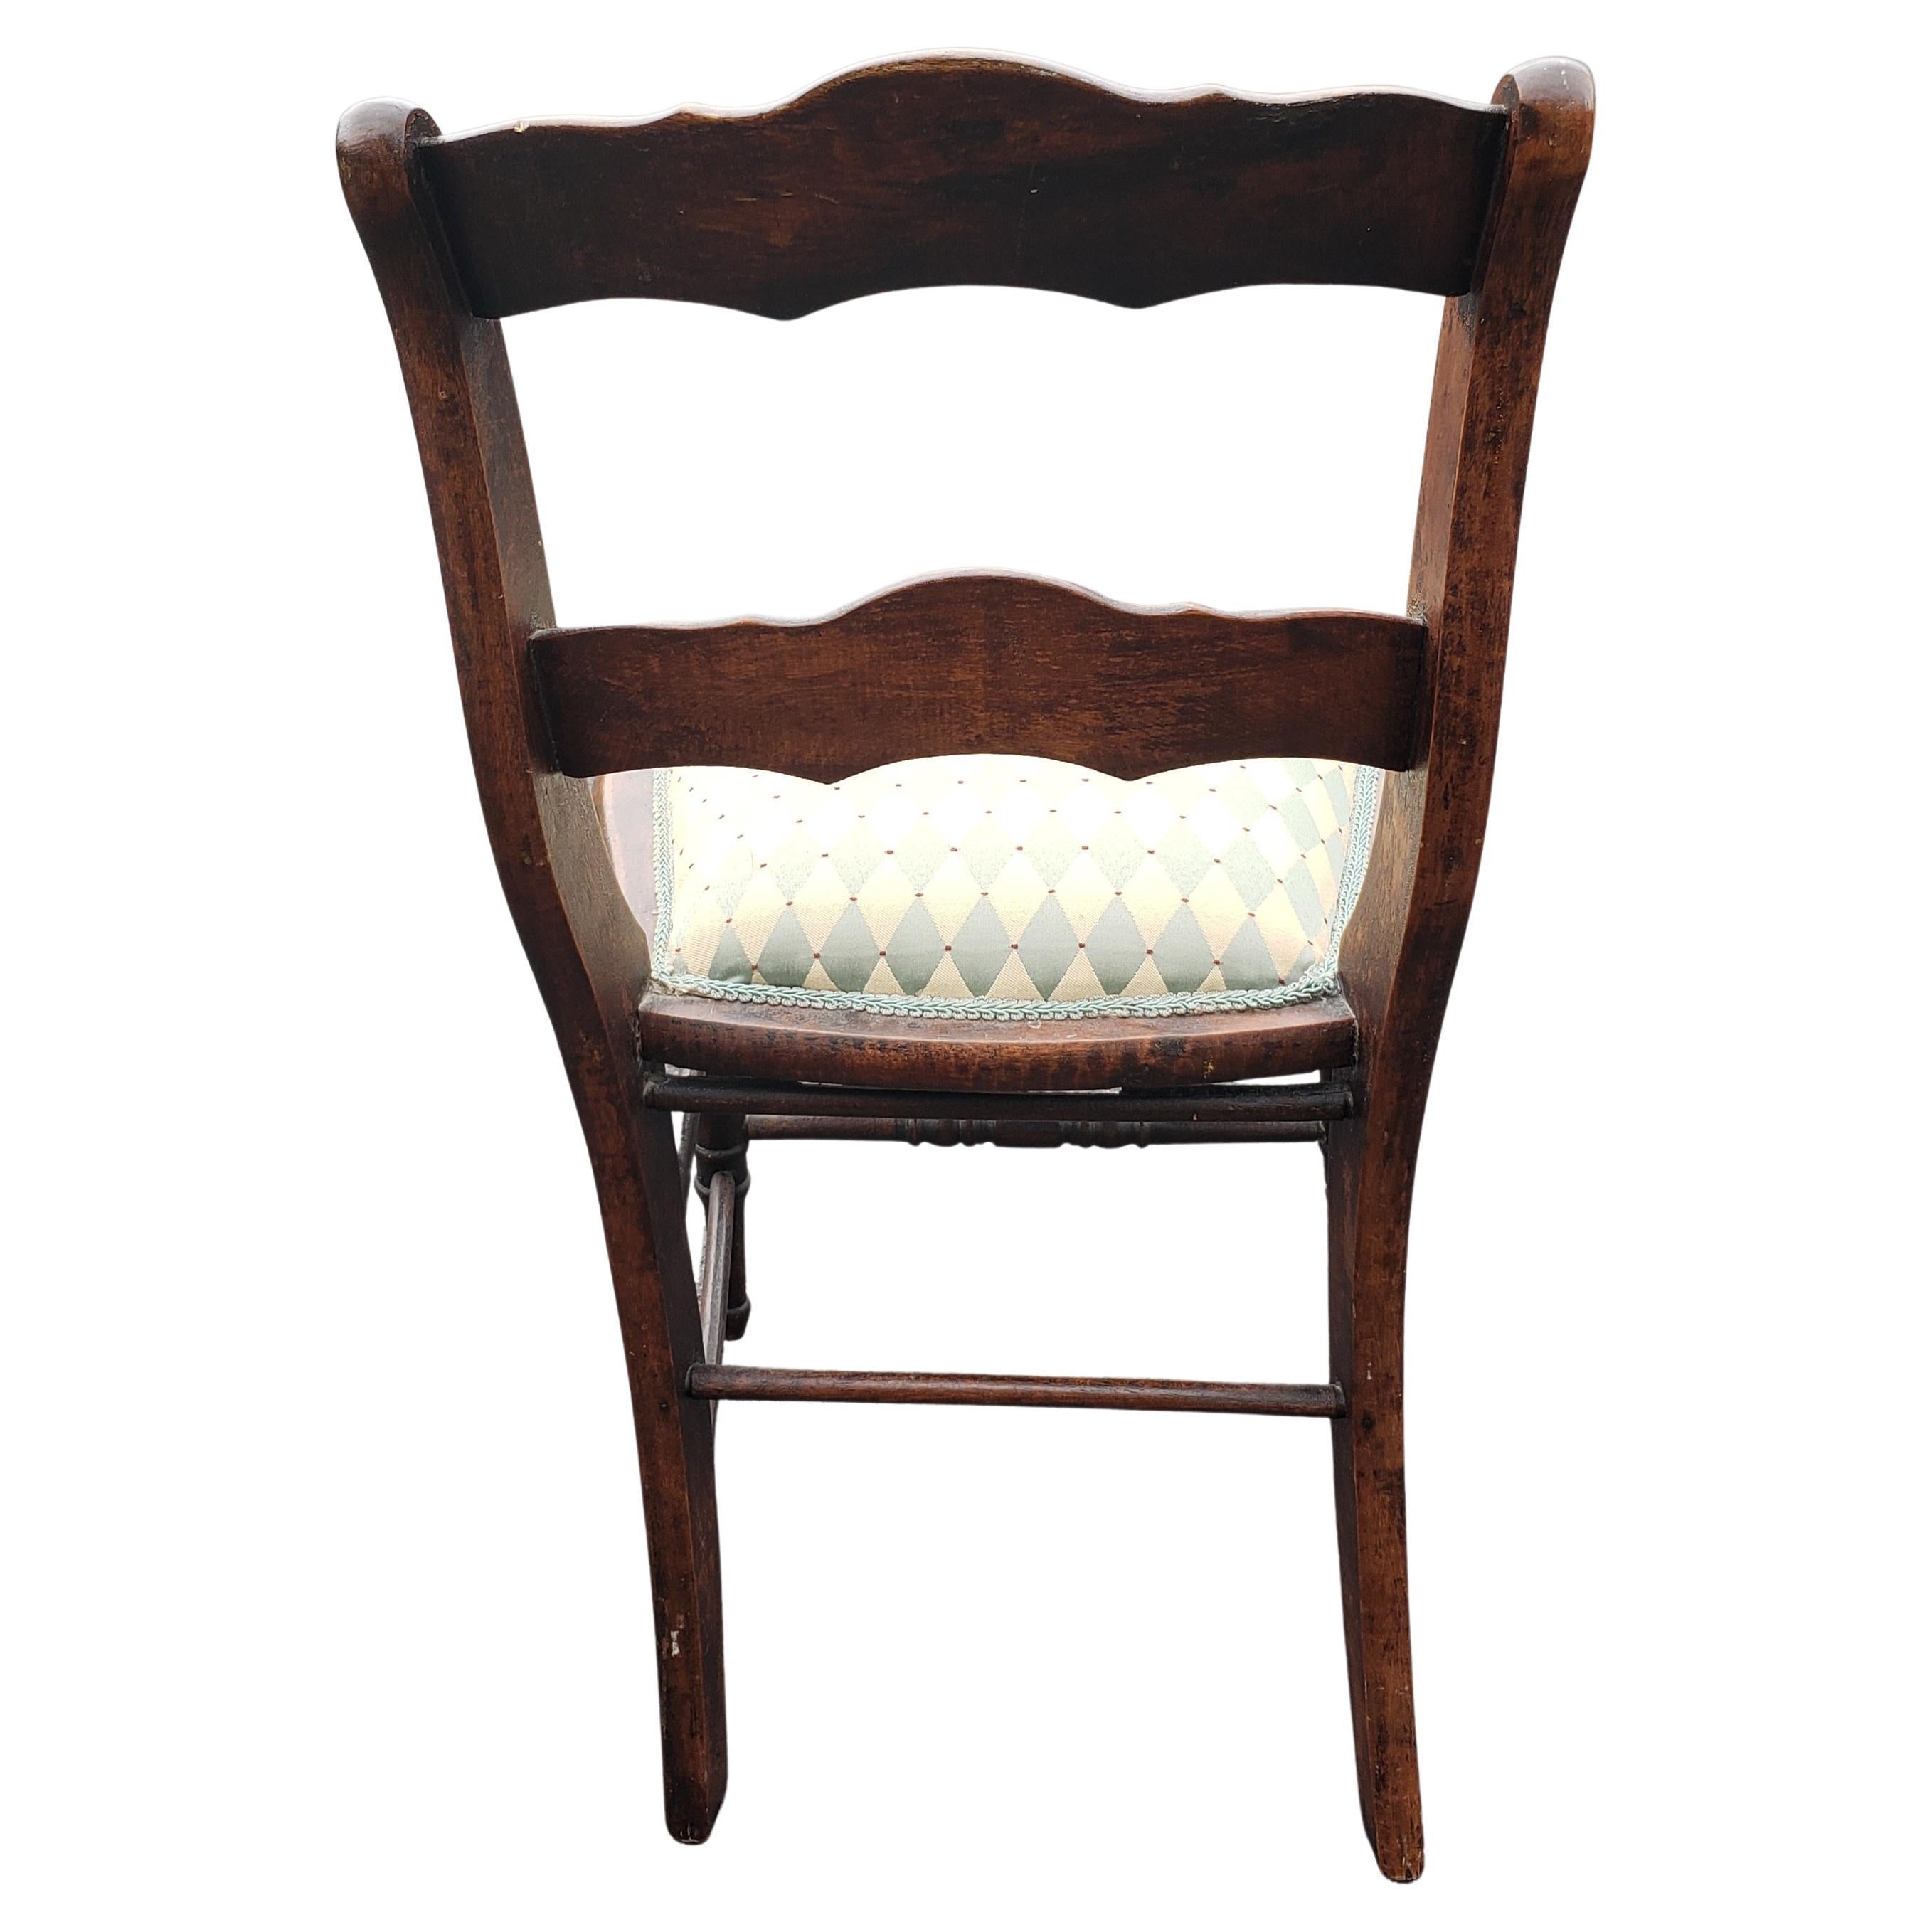 Upholstery Ladder Back Victorian Reupholstered Mahogany Side Chair, Circa 1860s For Sale